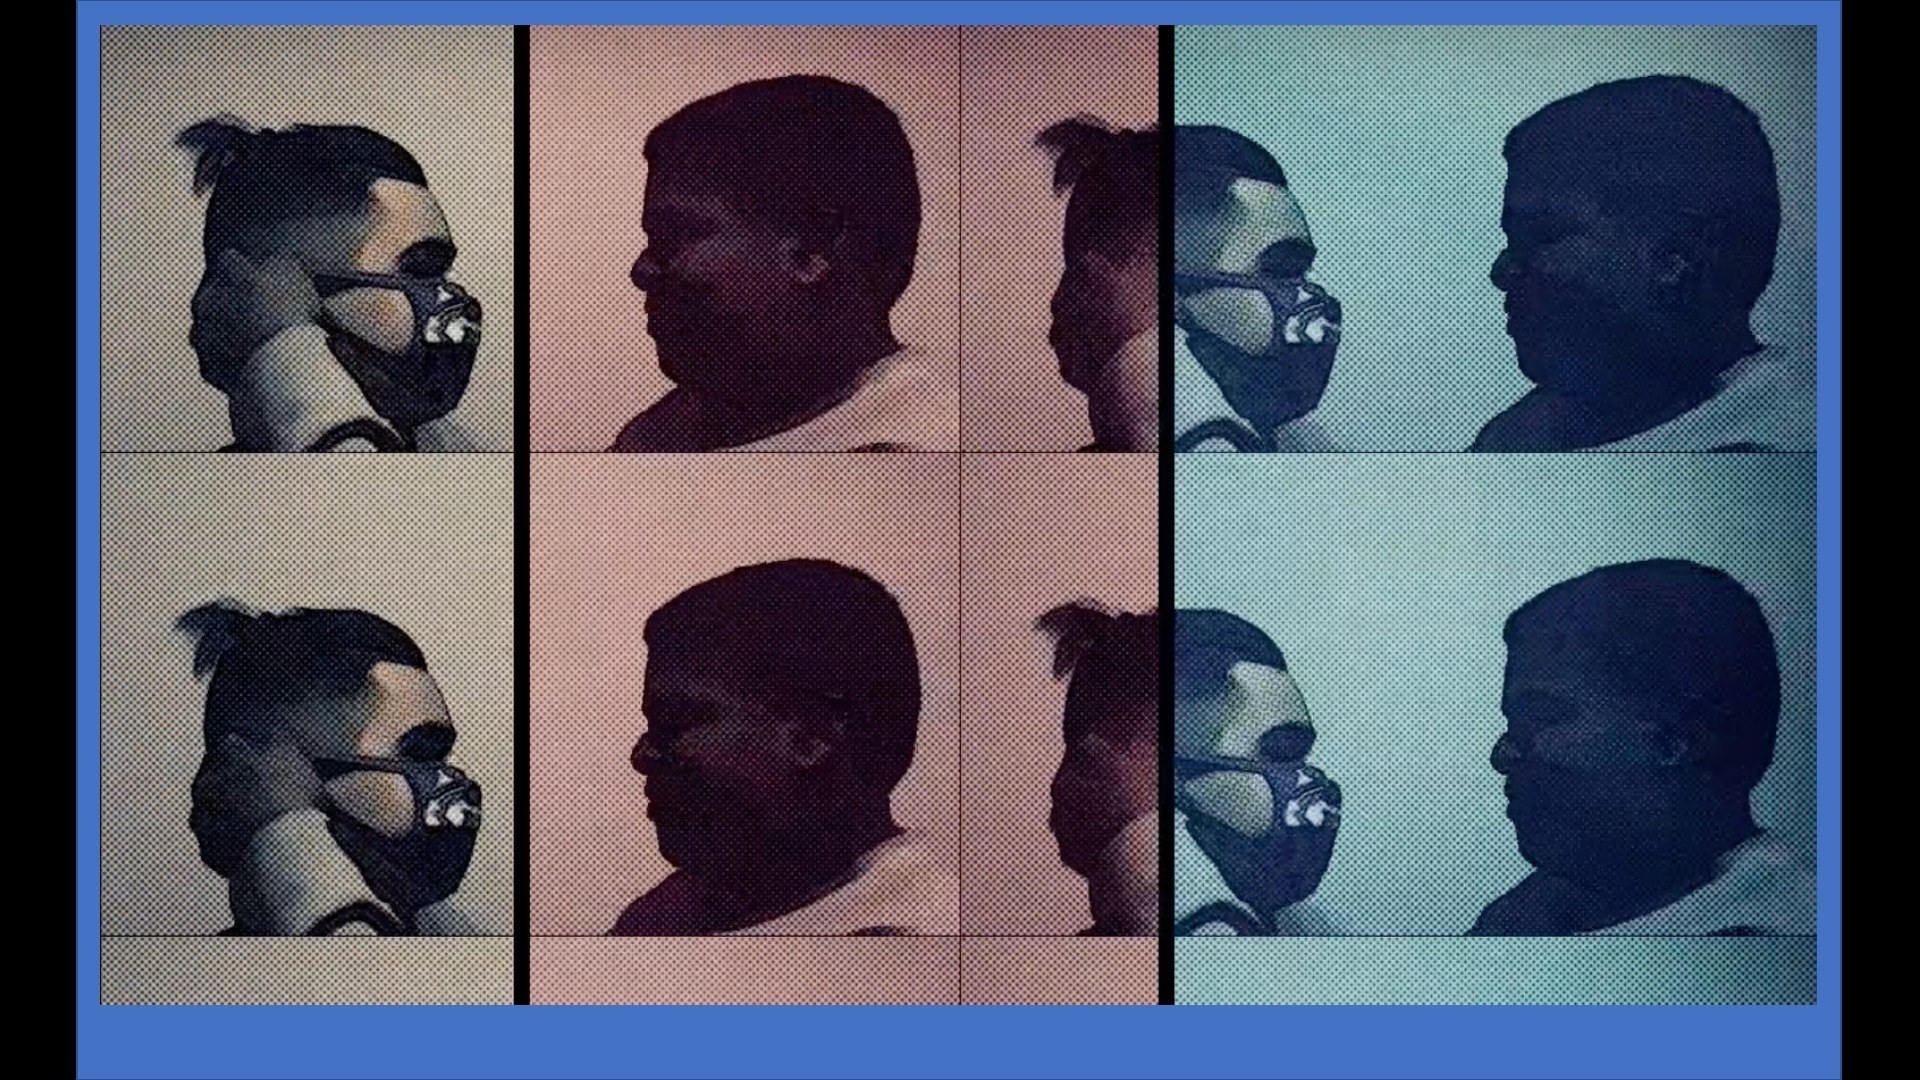 static grid of repeated two heads with one person removing another person’s COVID mask]